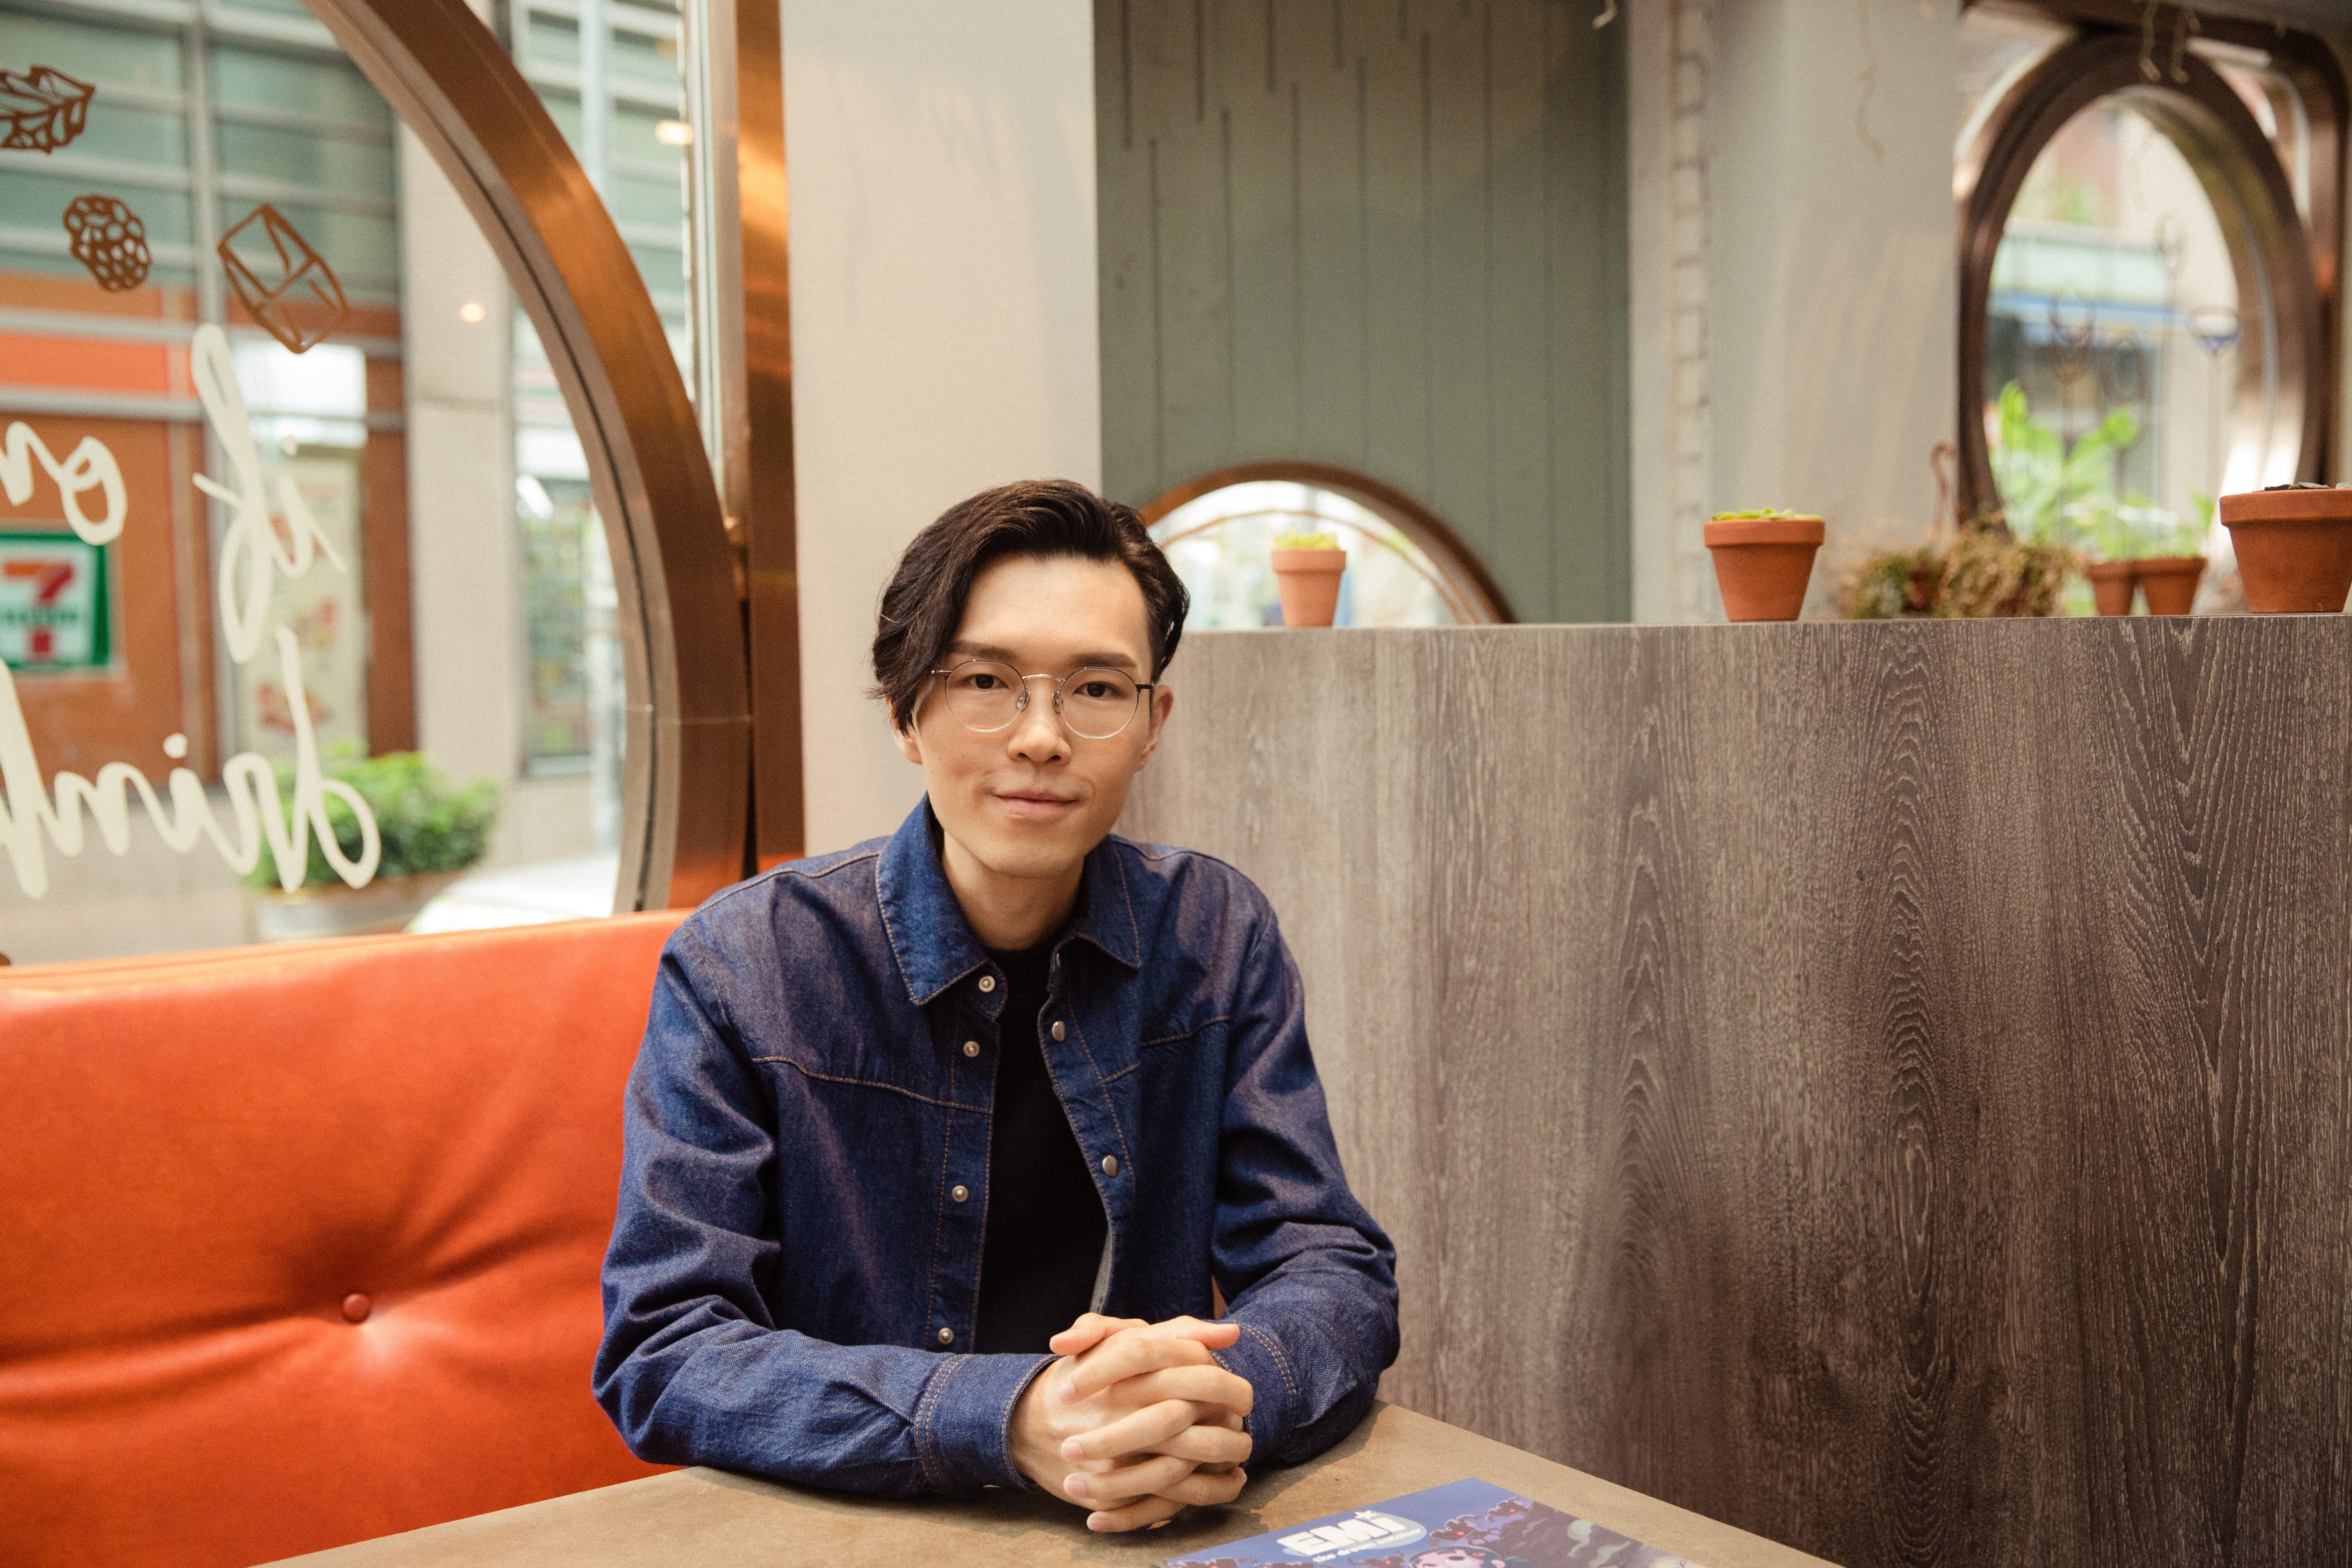 Khalil Fong, the successful singer-songwriter and now children’s author, at the launch of his first three Emi The Dream Catcher children’s graphic novels at Grassroots Pantry in Sheung Wan, Hong Kong.